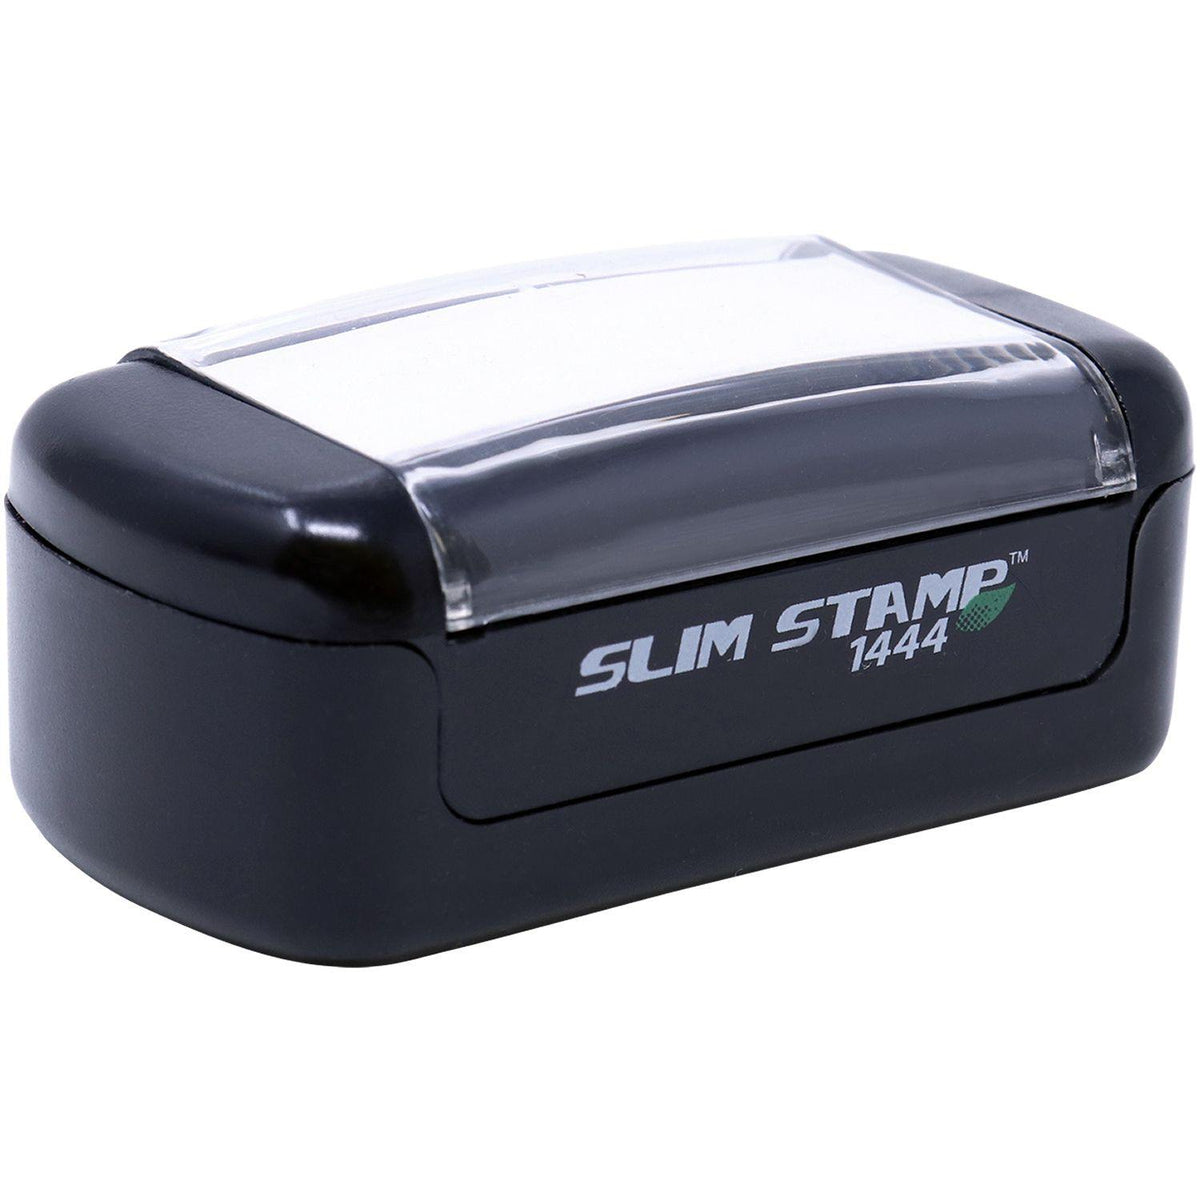 Alt View of Slim Pre Inked Excellent Work Stamp Mount Angle